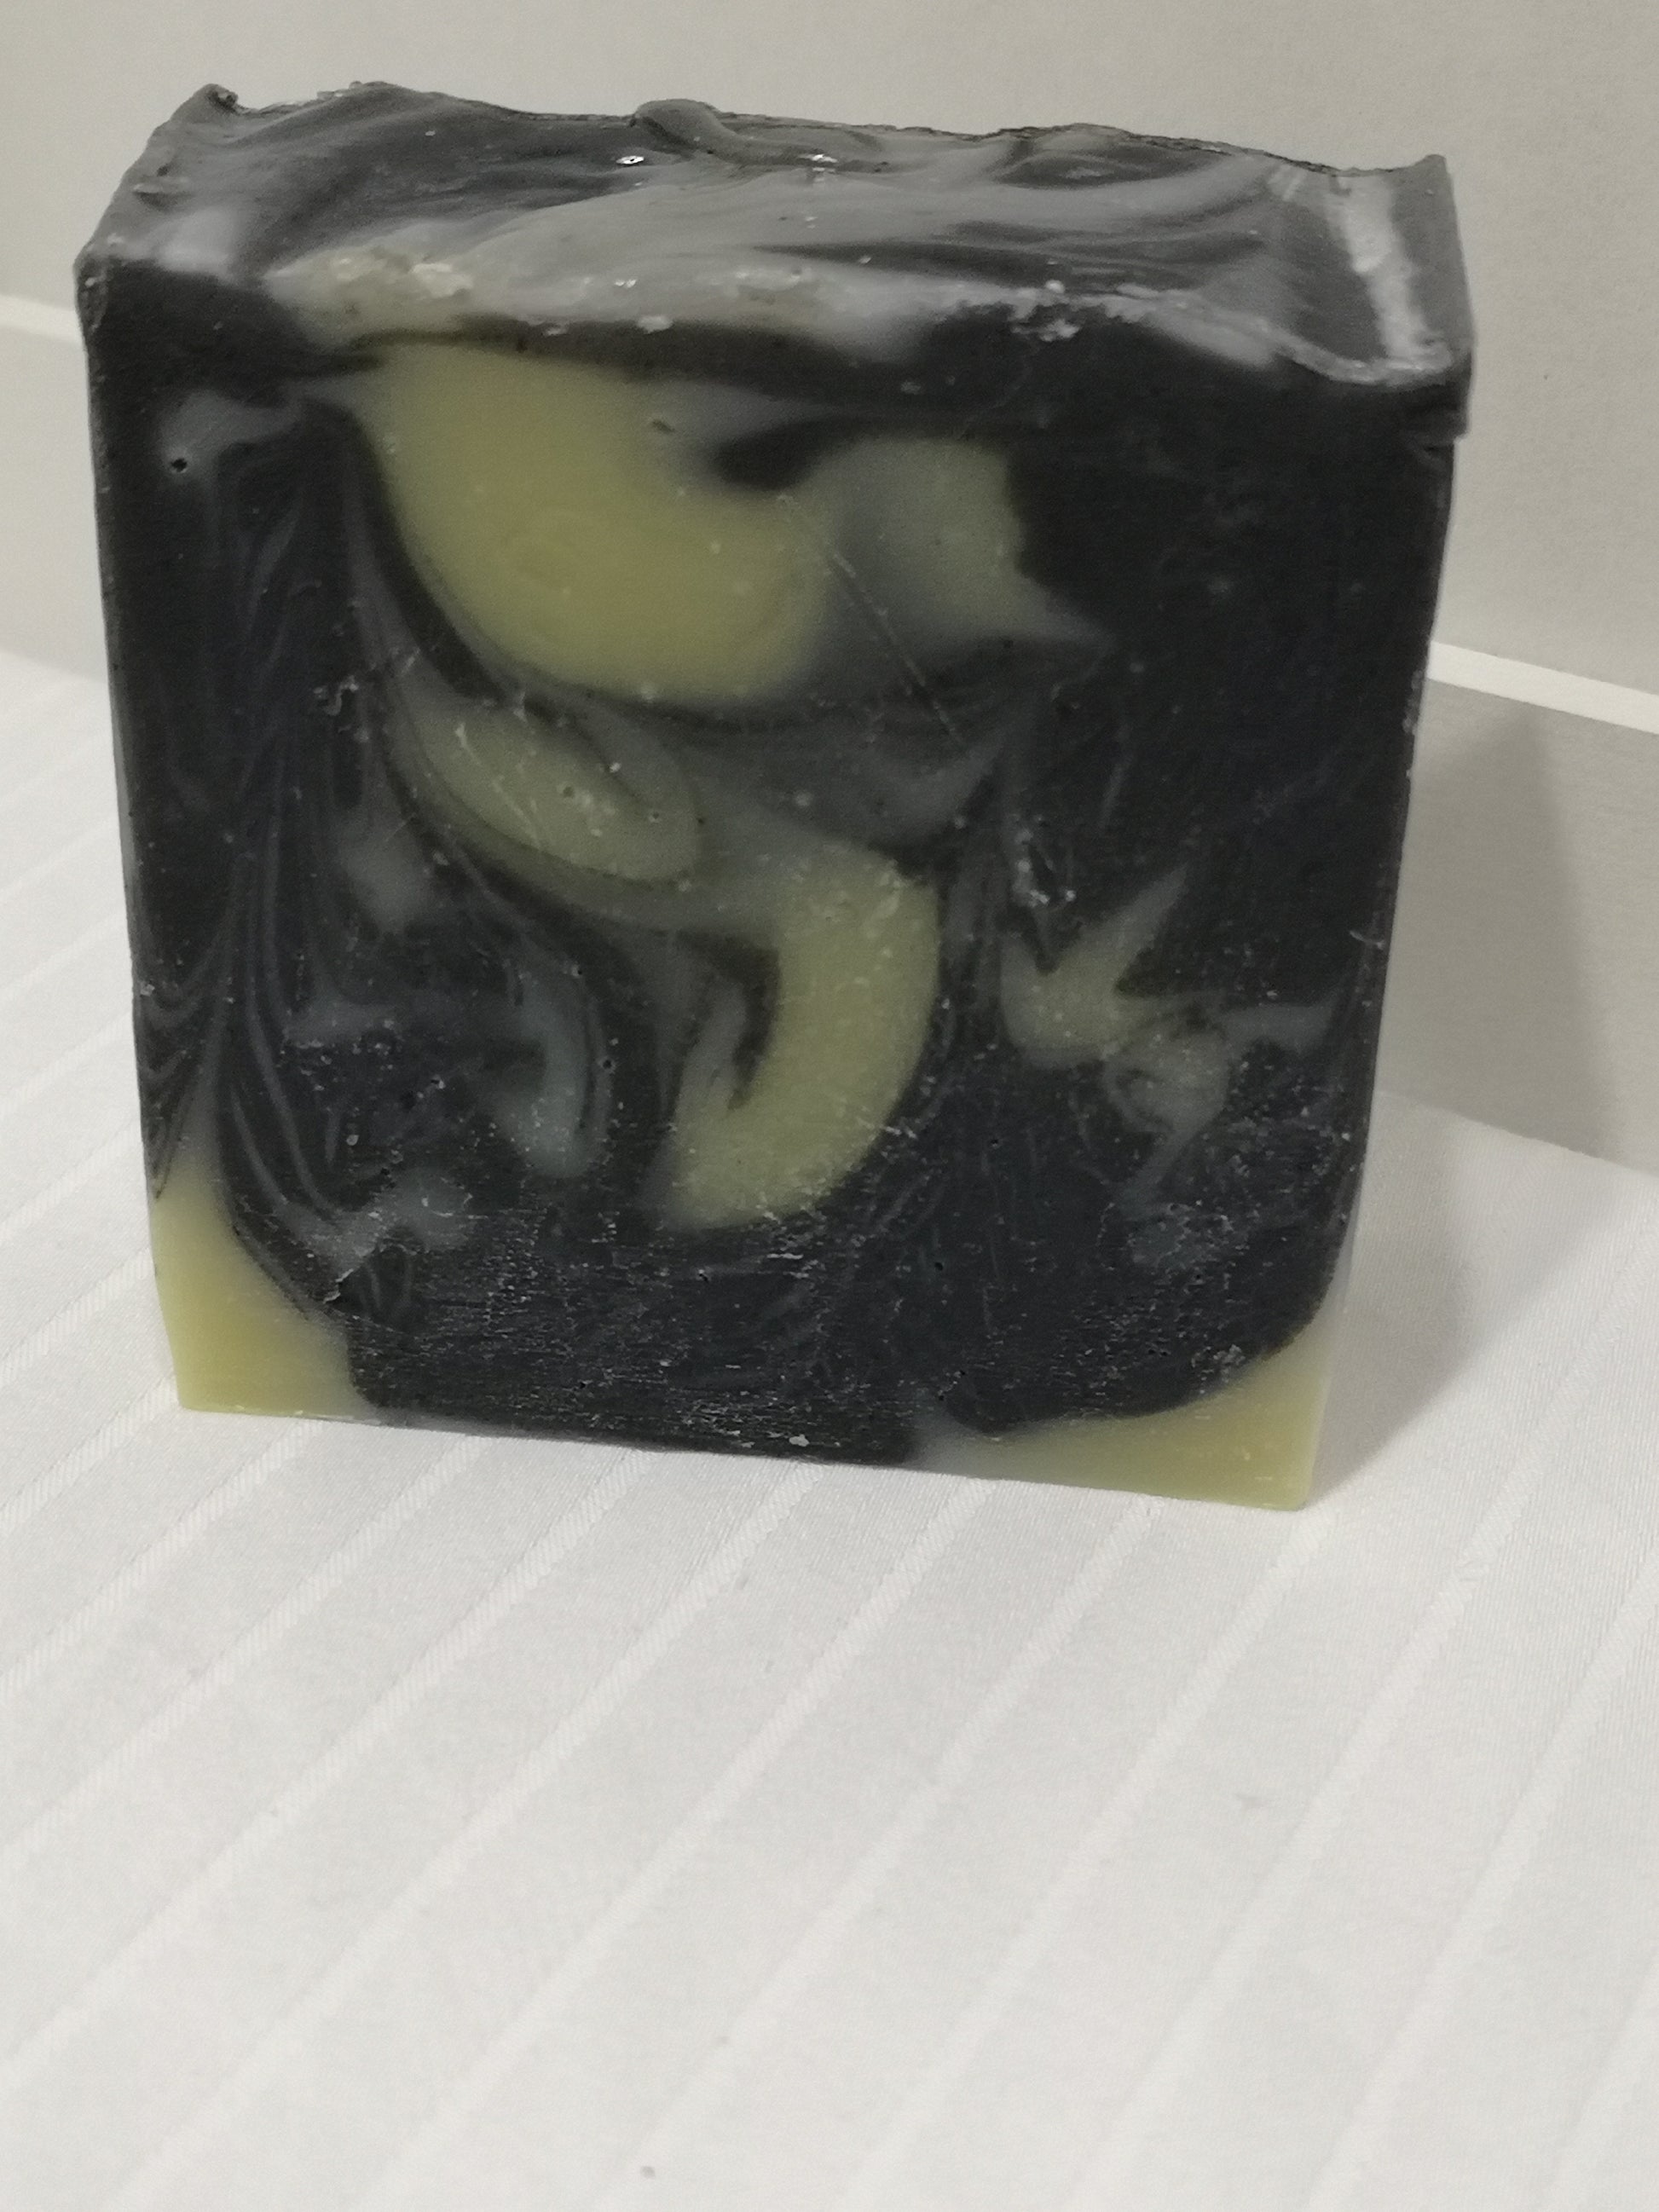 One bar of soap. Black with creamy off-white swirls. 